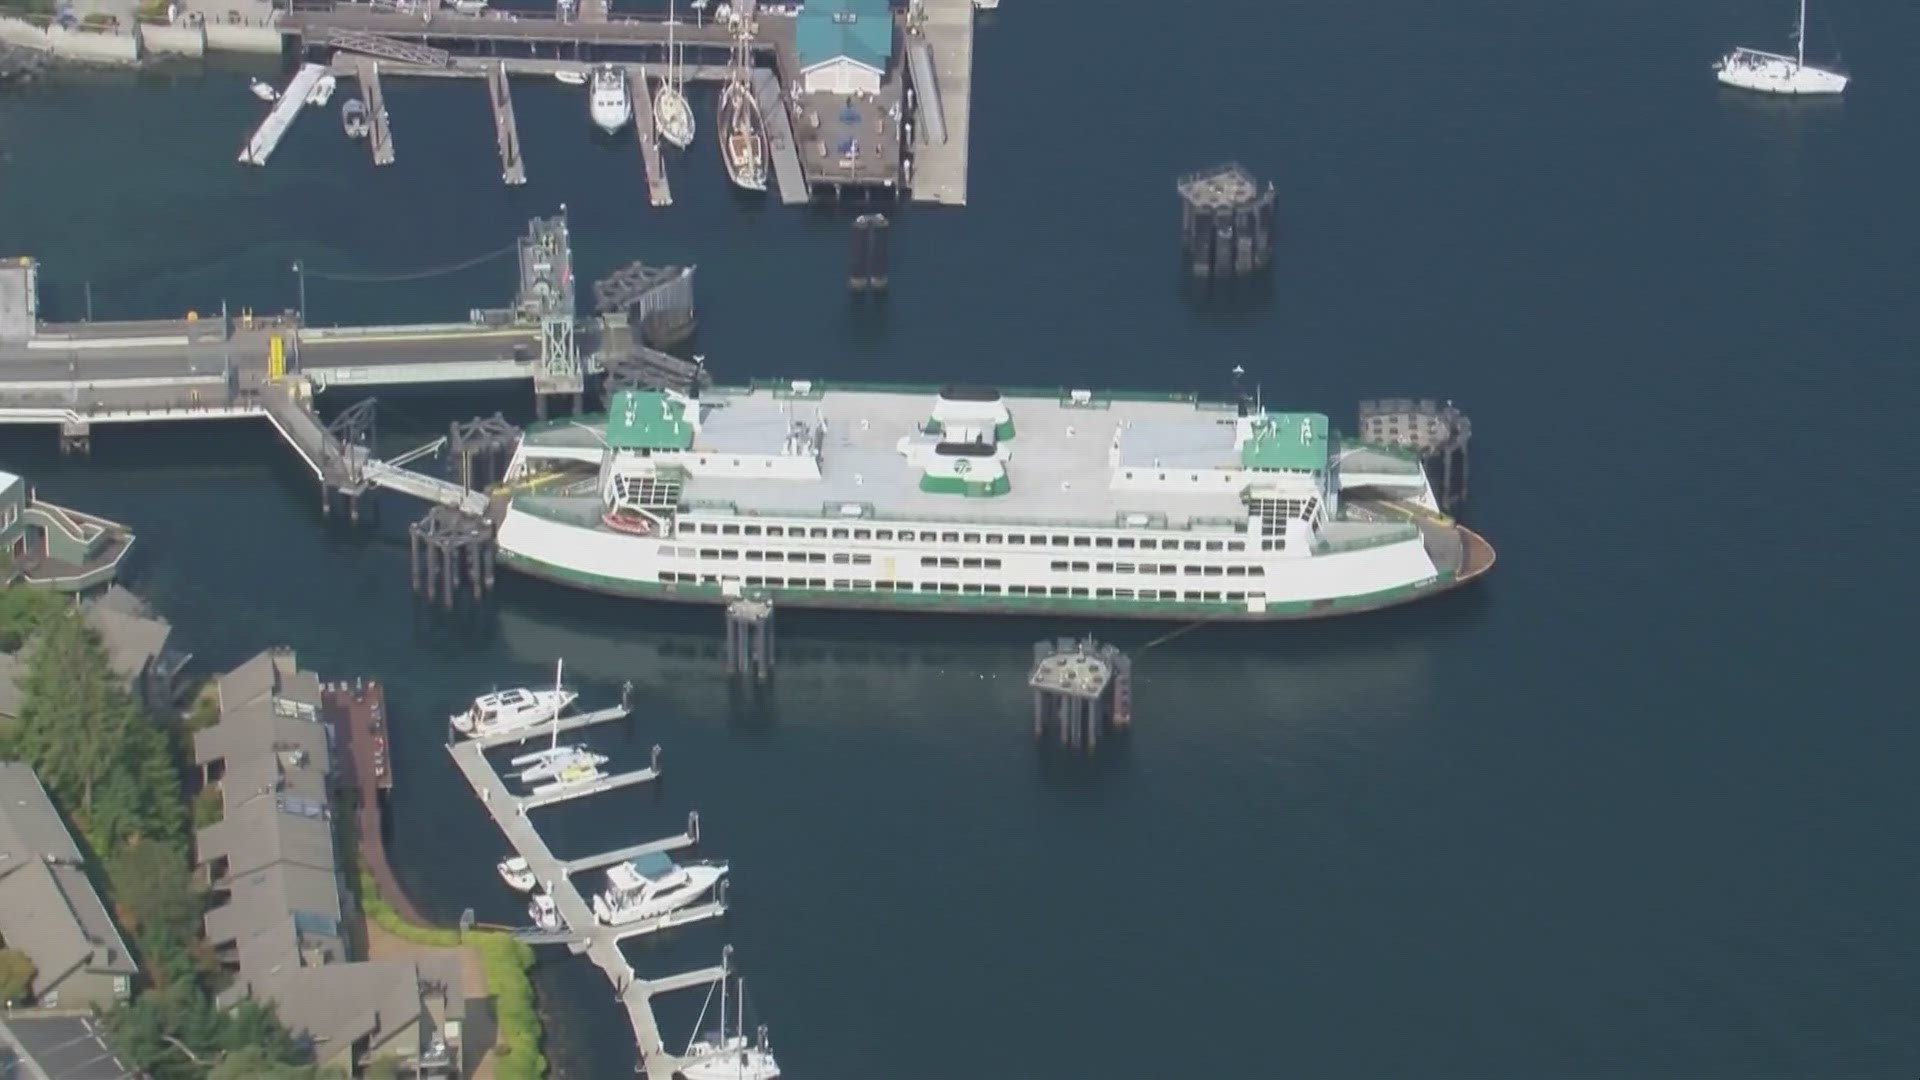 Service was suspended after the Chelan ferry ran aground near Friday Harbor on Sunday night.